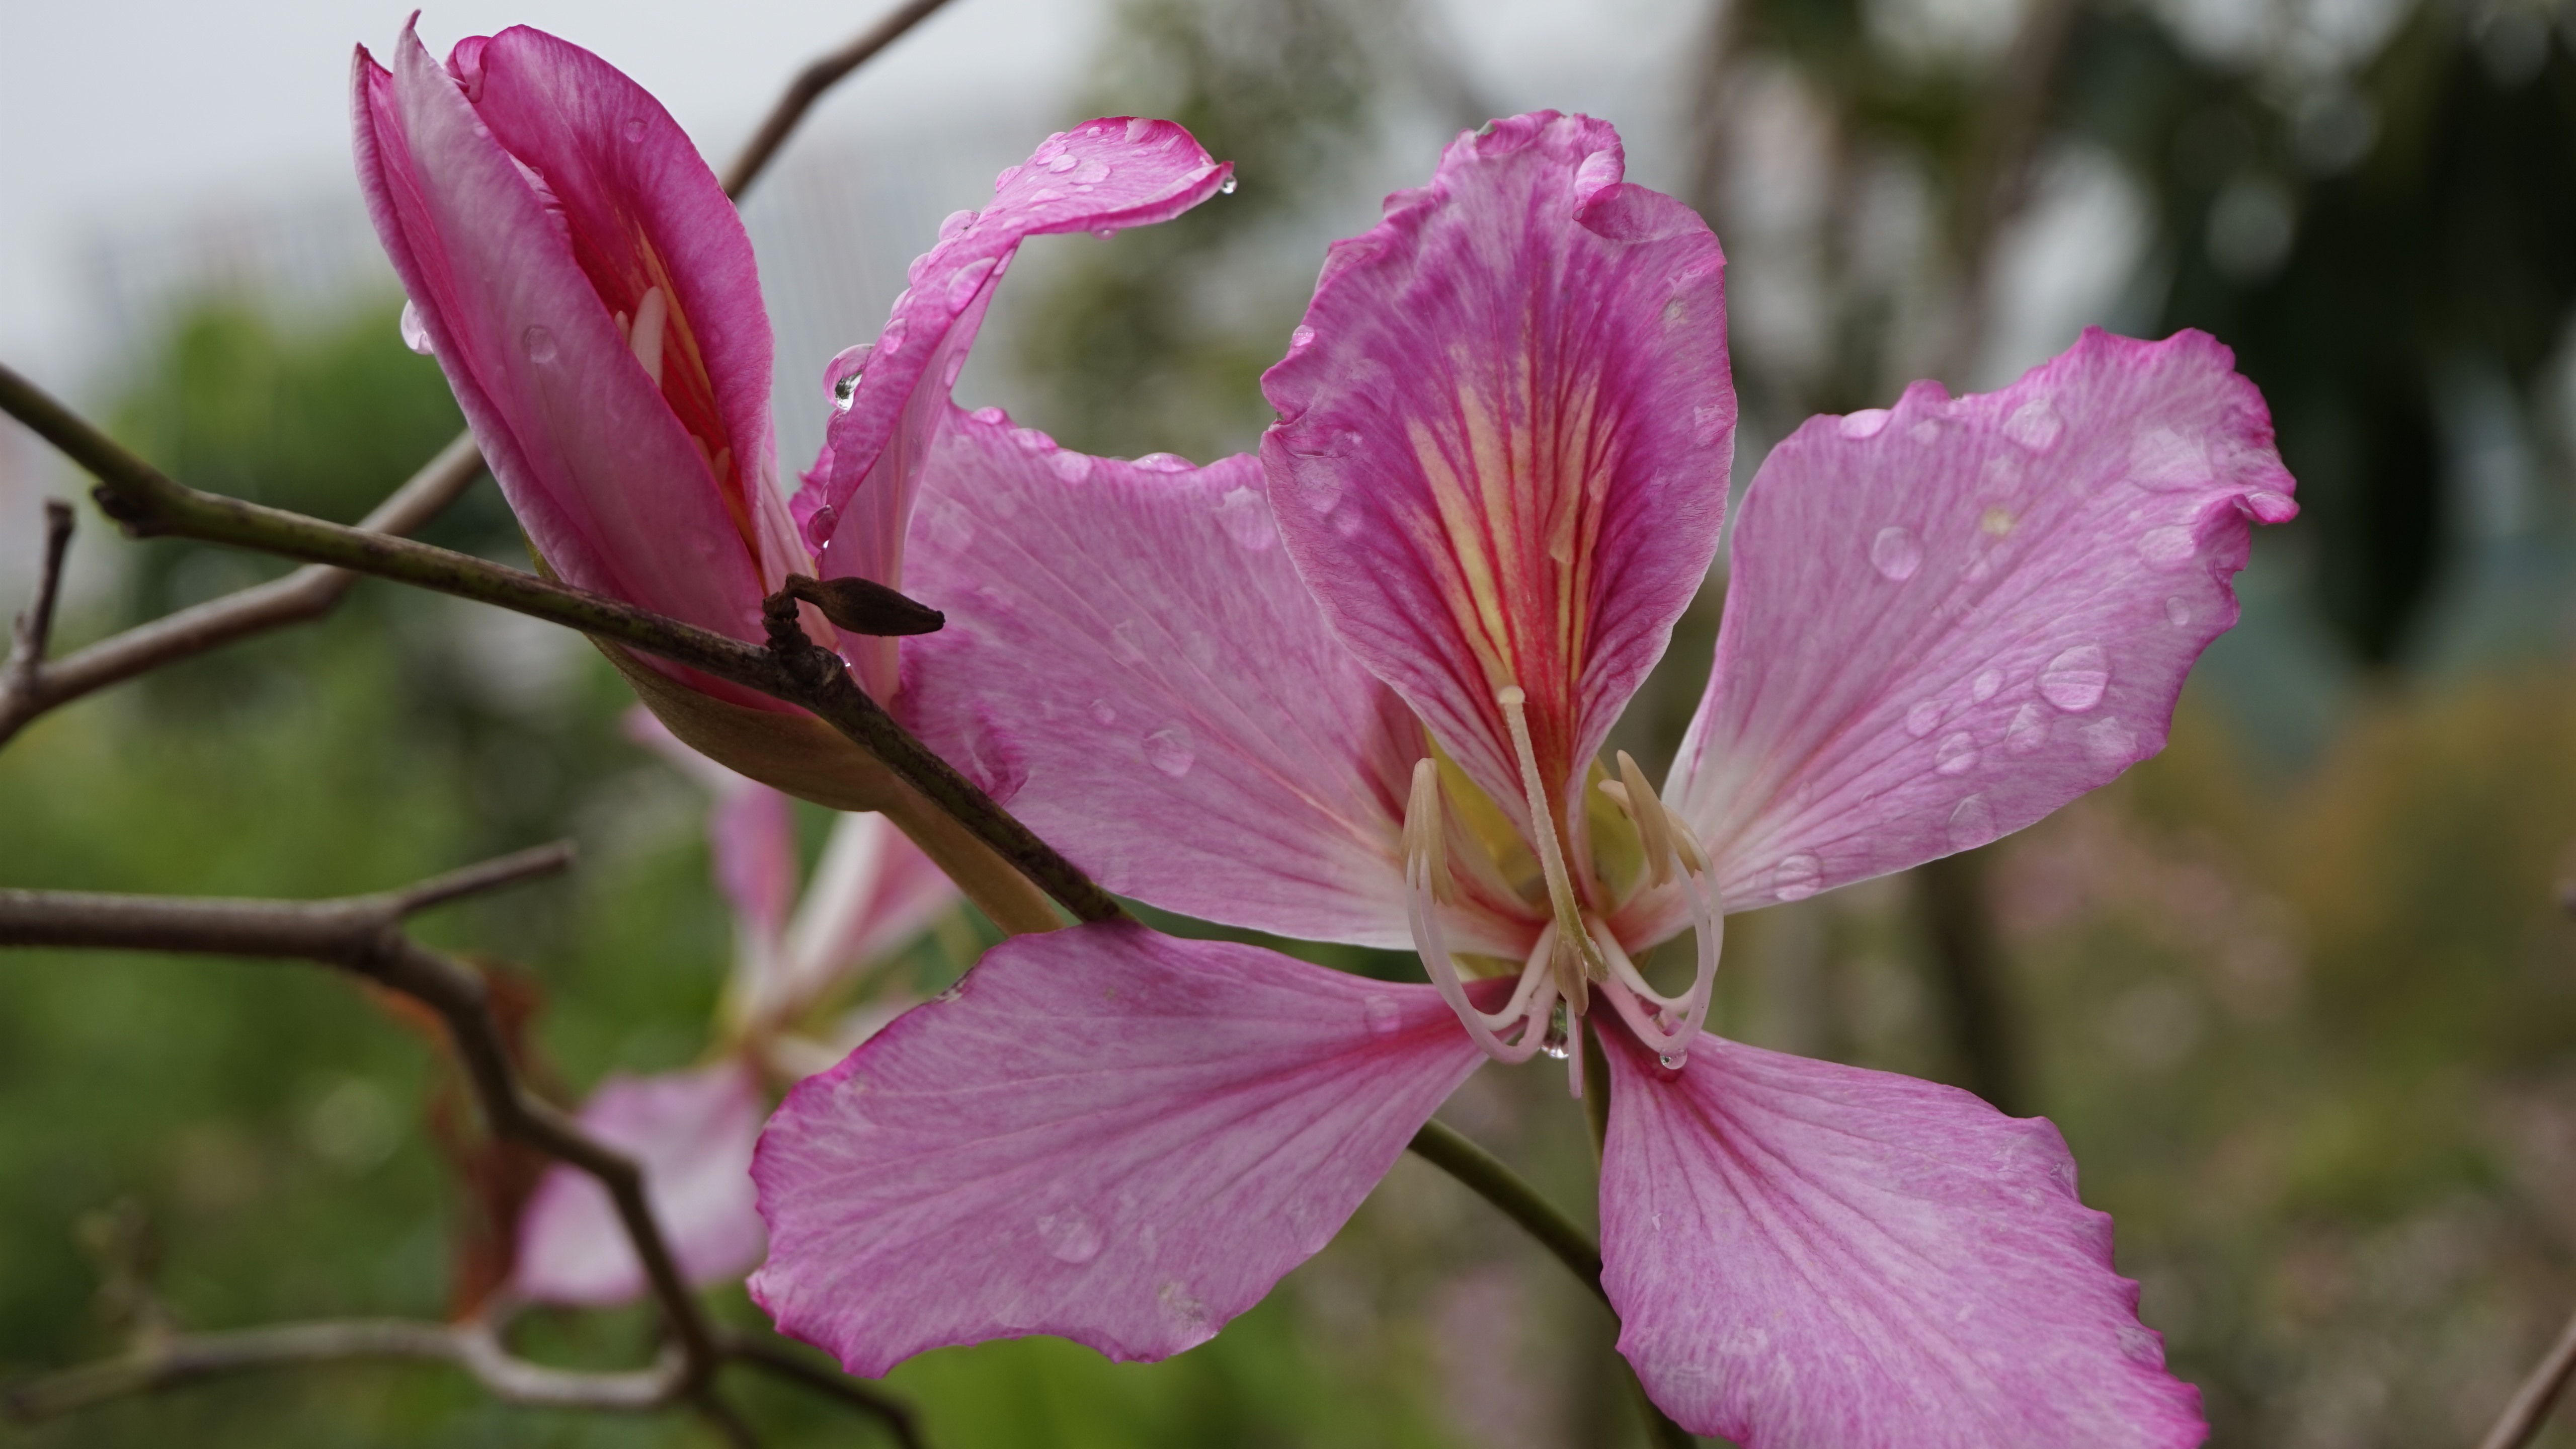 Bauhinia with morning dew drops